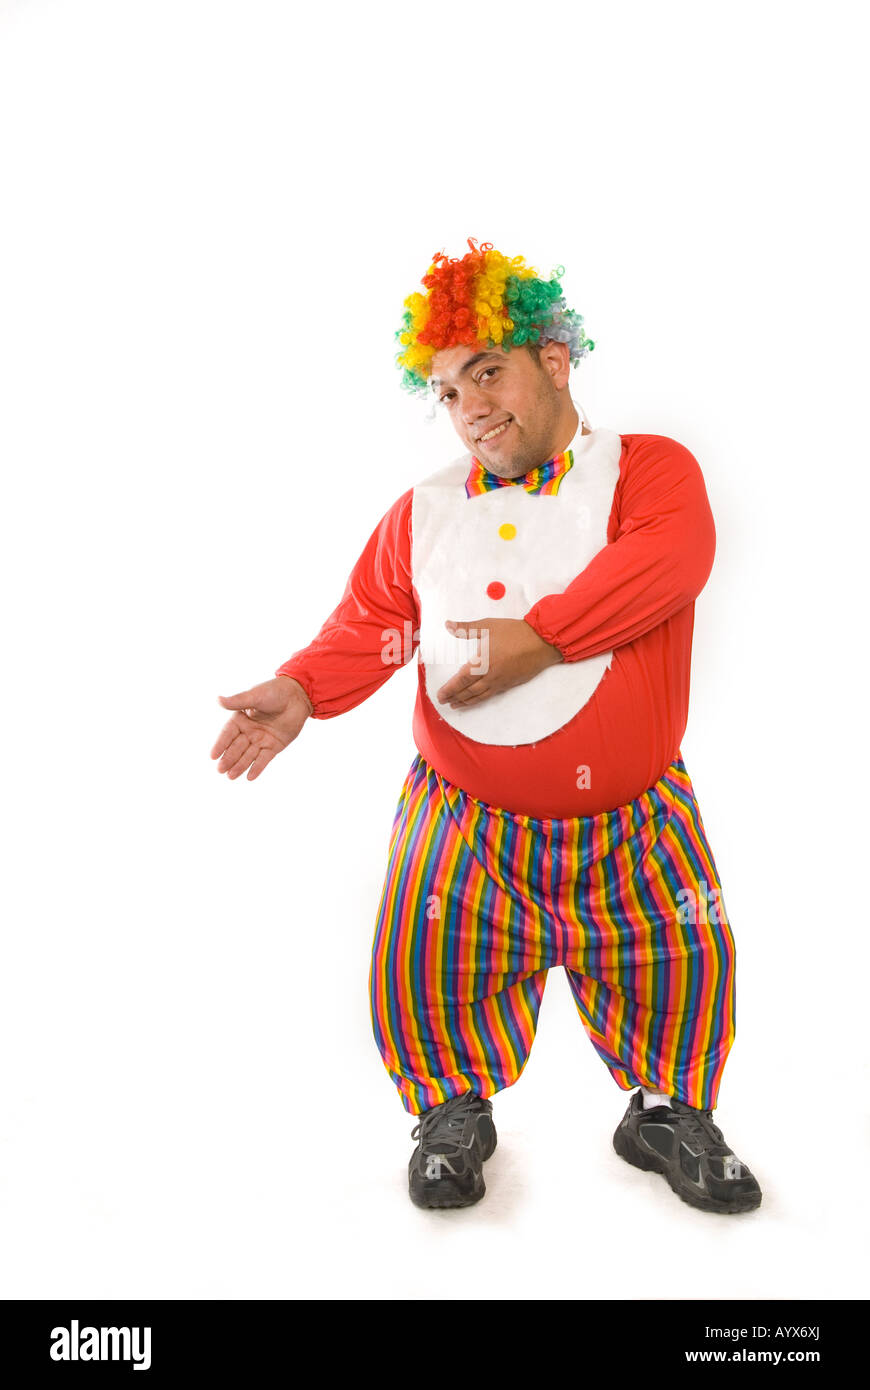 Full length portrait of a midget clown pointing hands against a white background Stock Photo